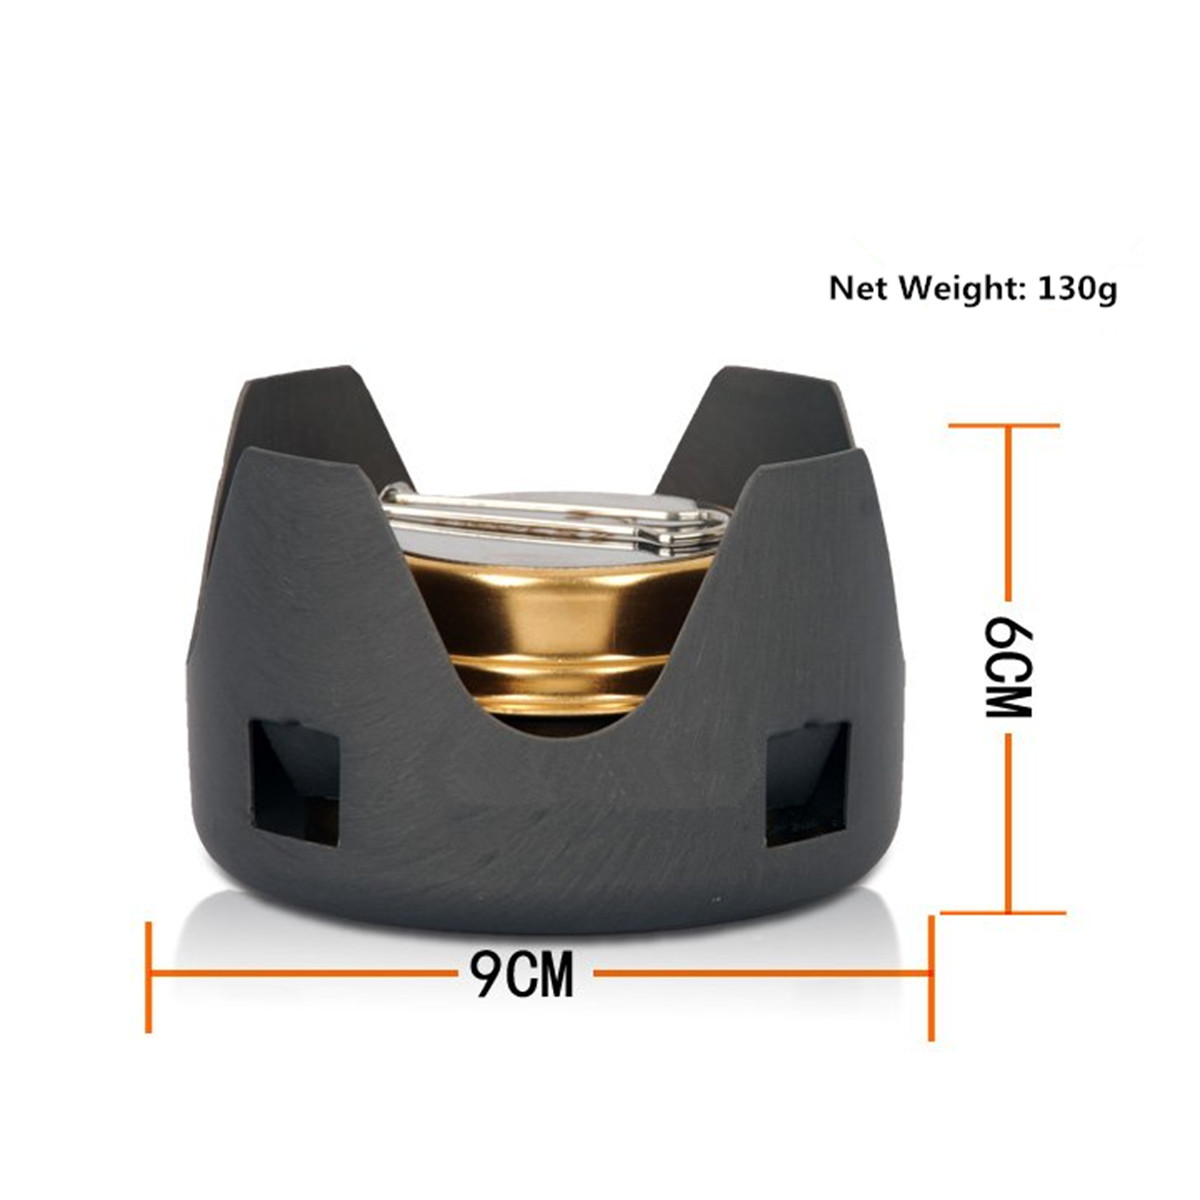 Portable Outdoor Mini Spirit Burner Stove for BBQ Hiking Camping